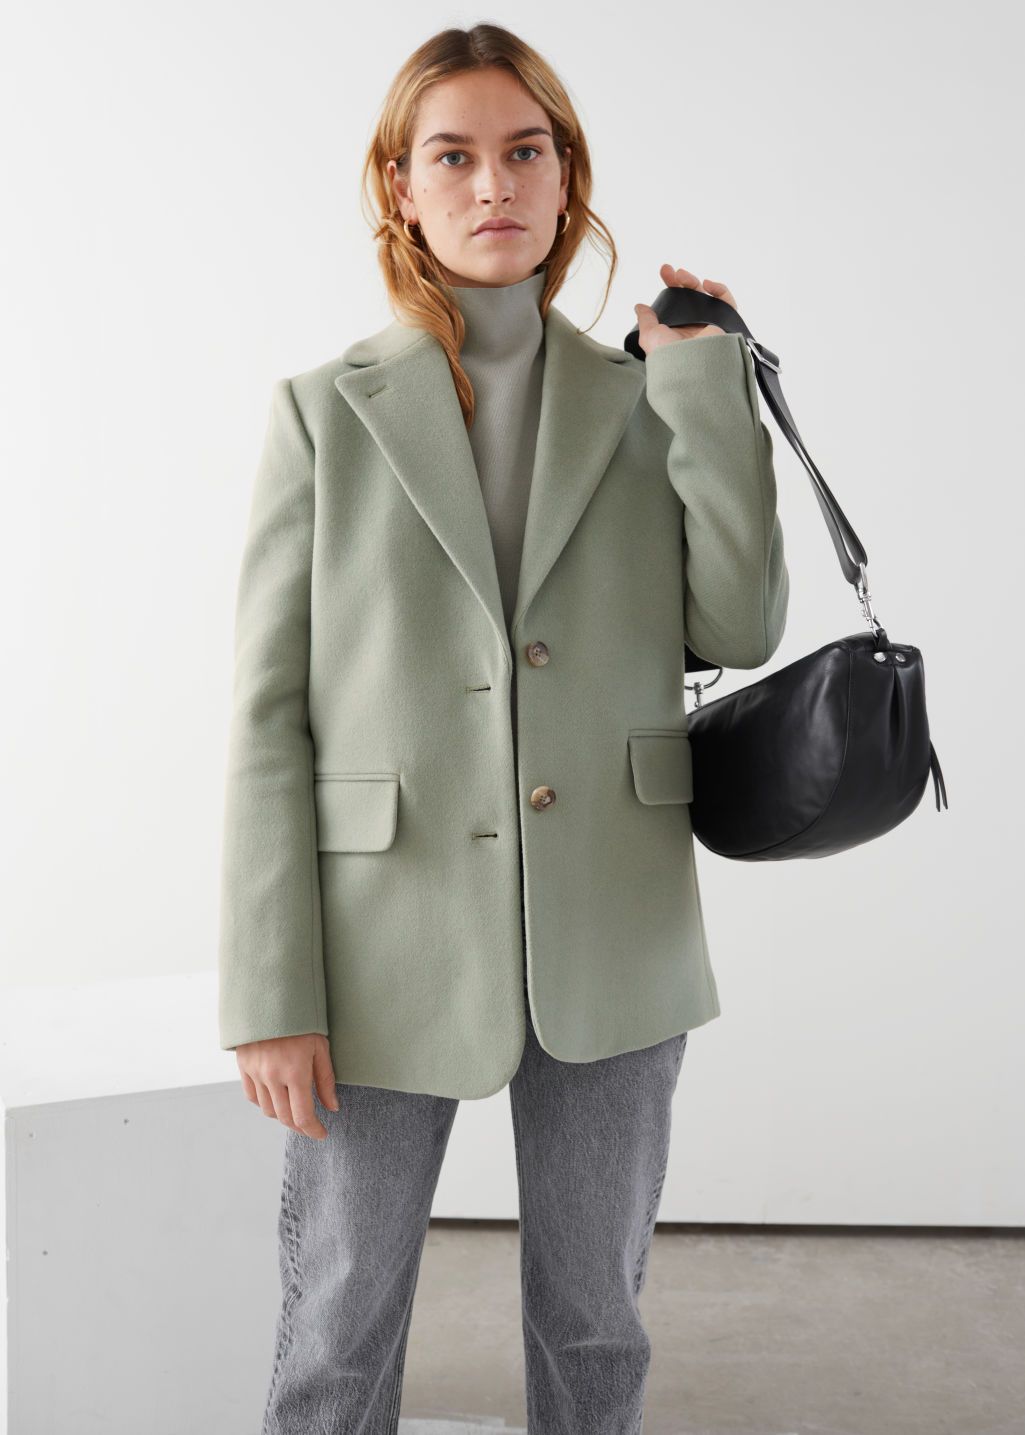 Green Blazers: Sophisticated Greenery in Fashion